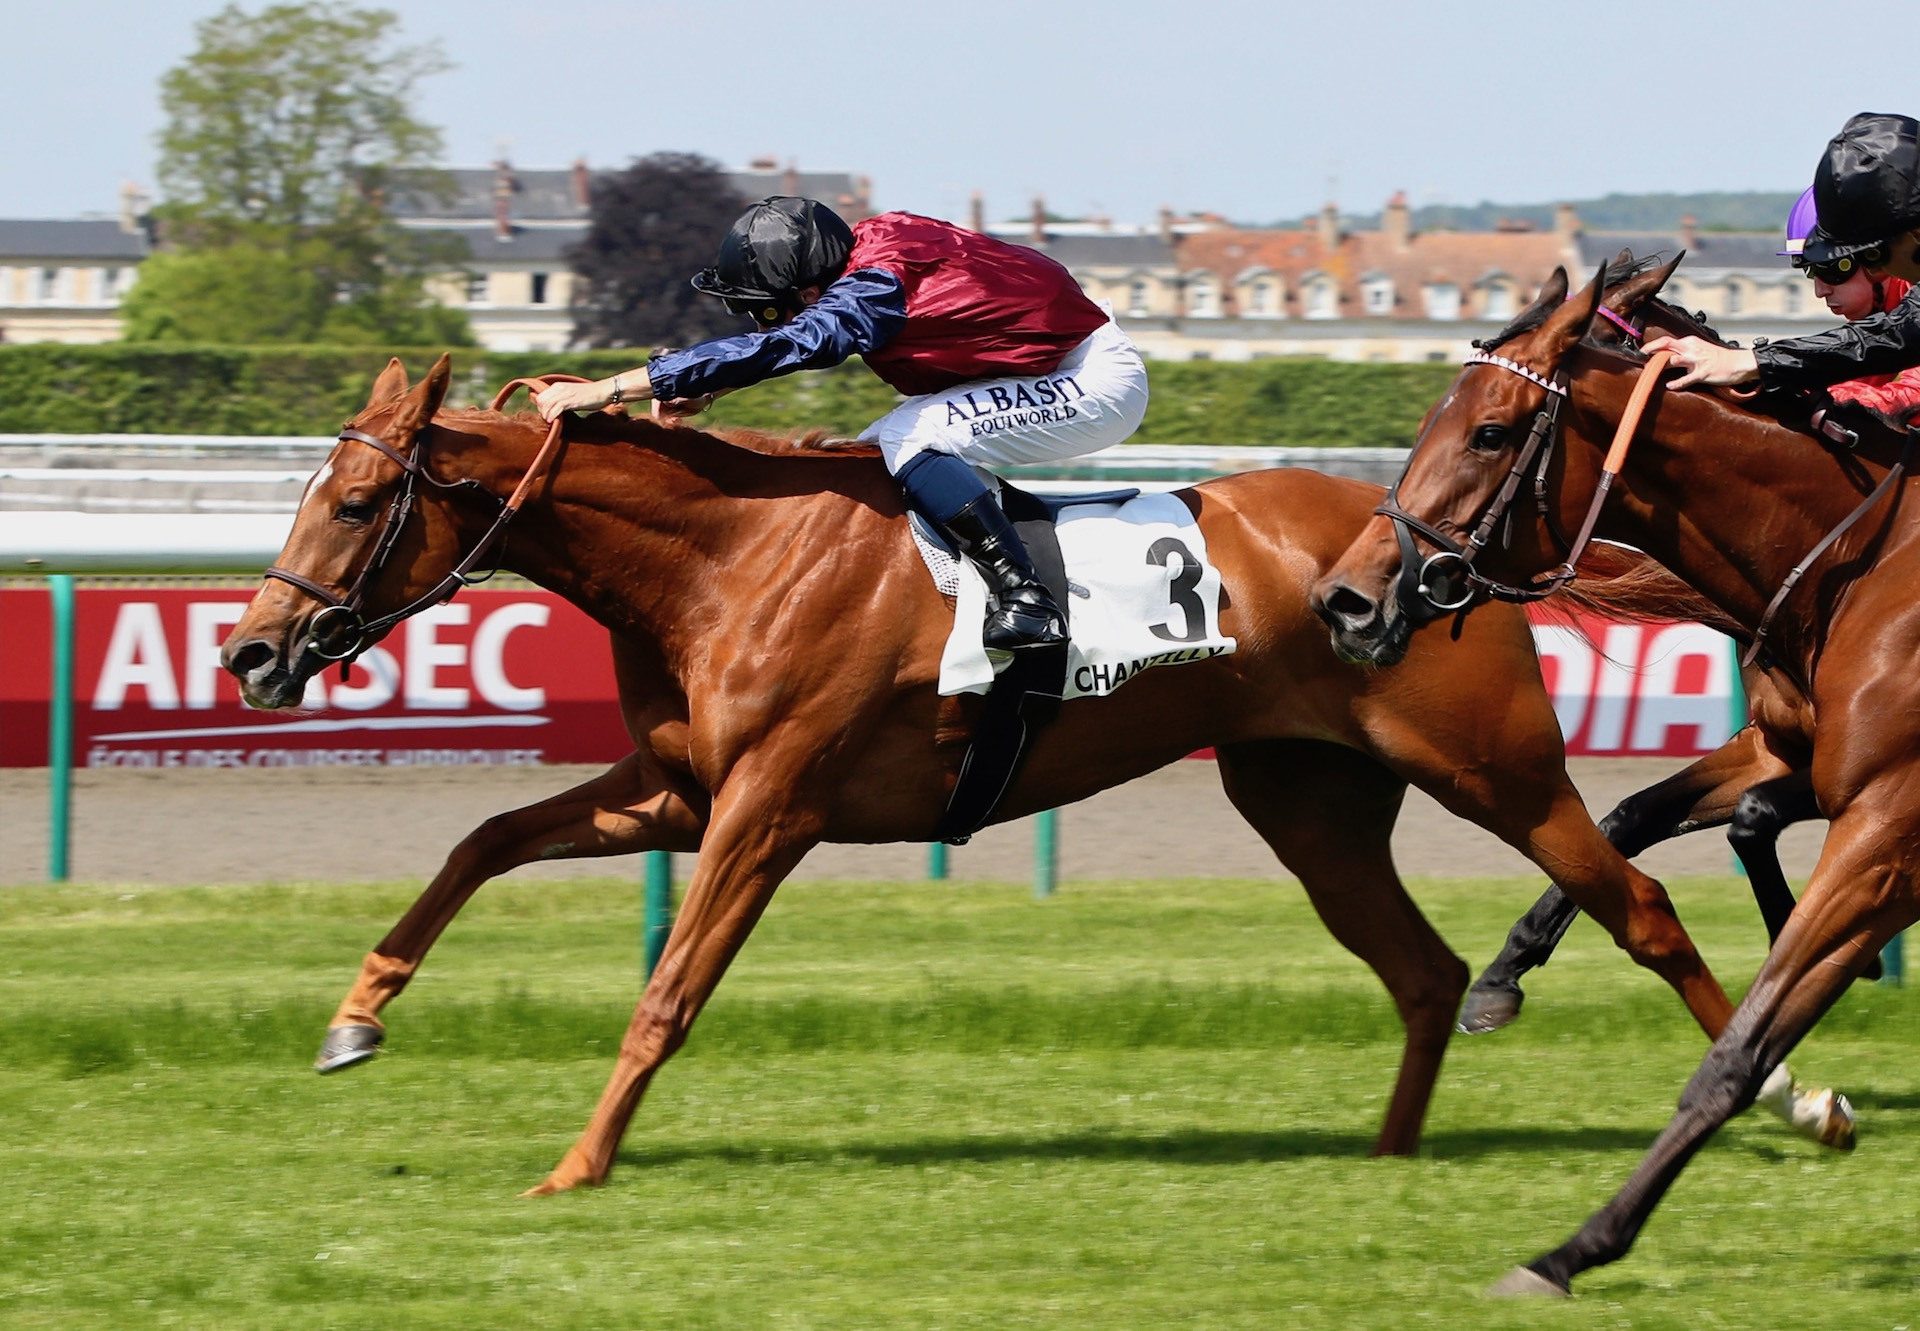 Tasmania (Australia) Wins For The Second Time at Chantilly